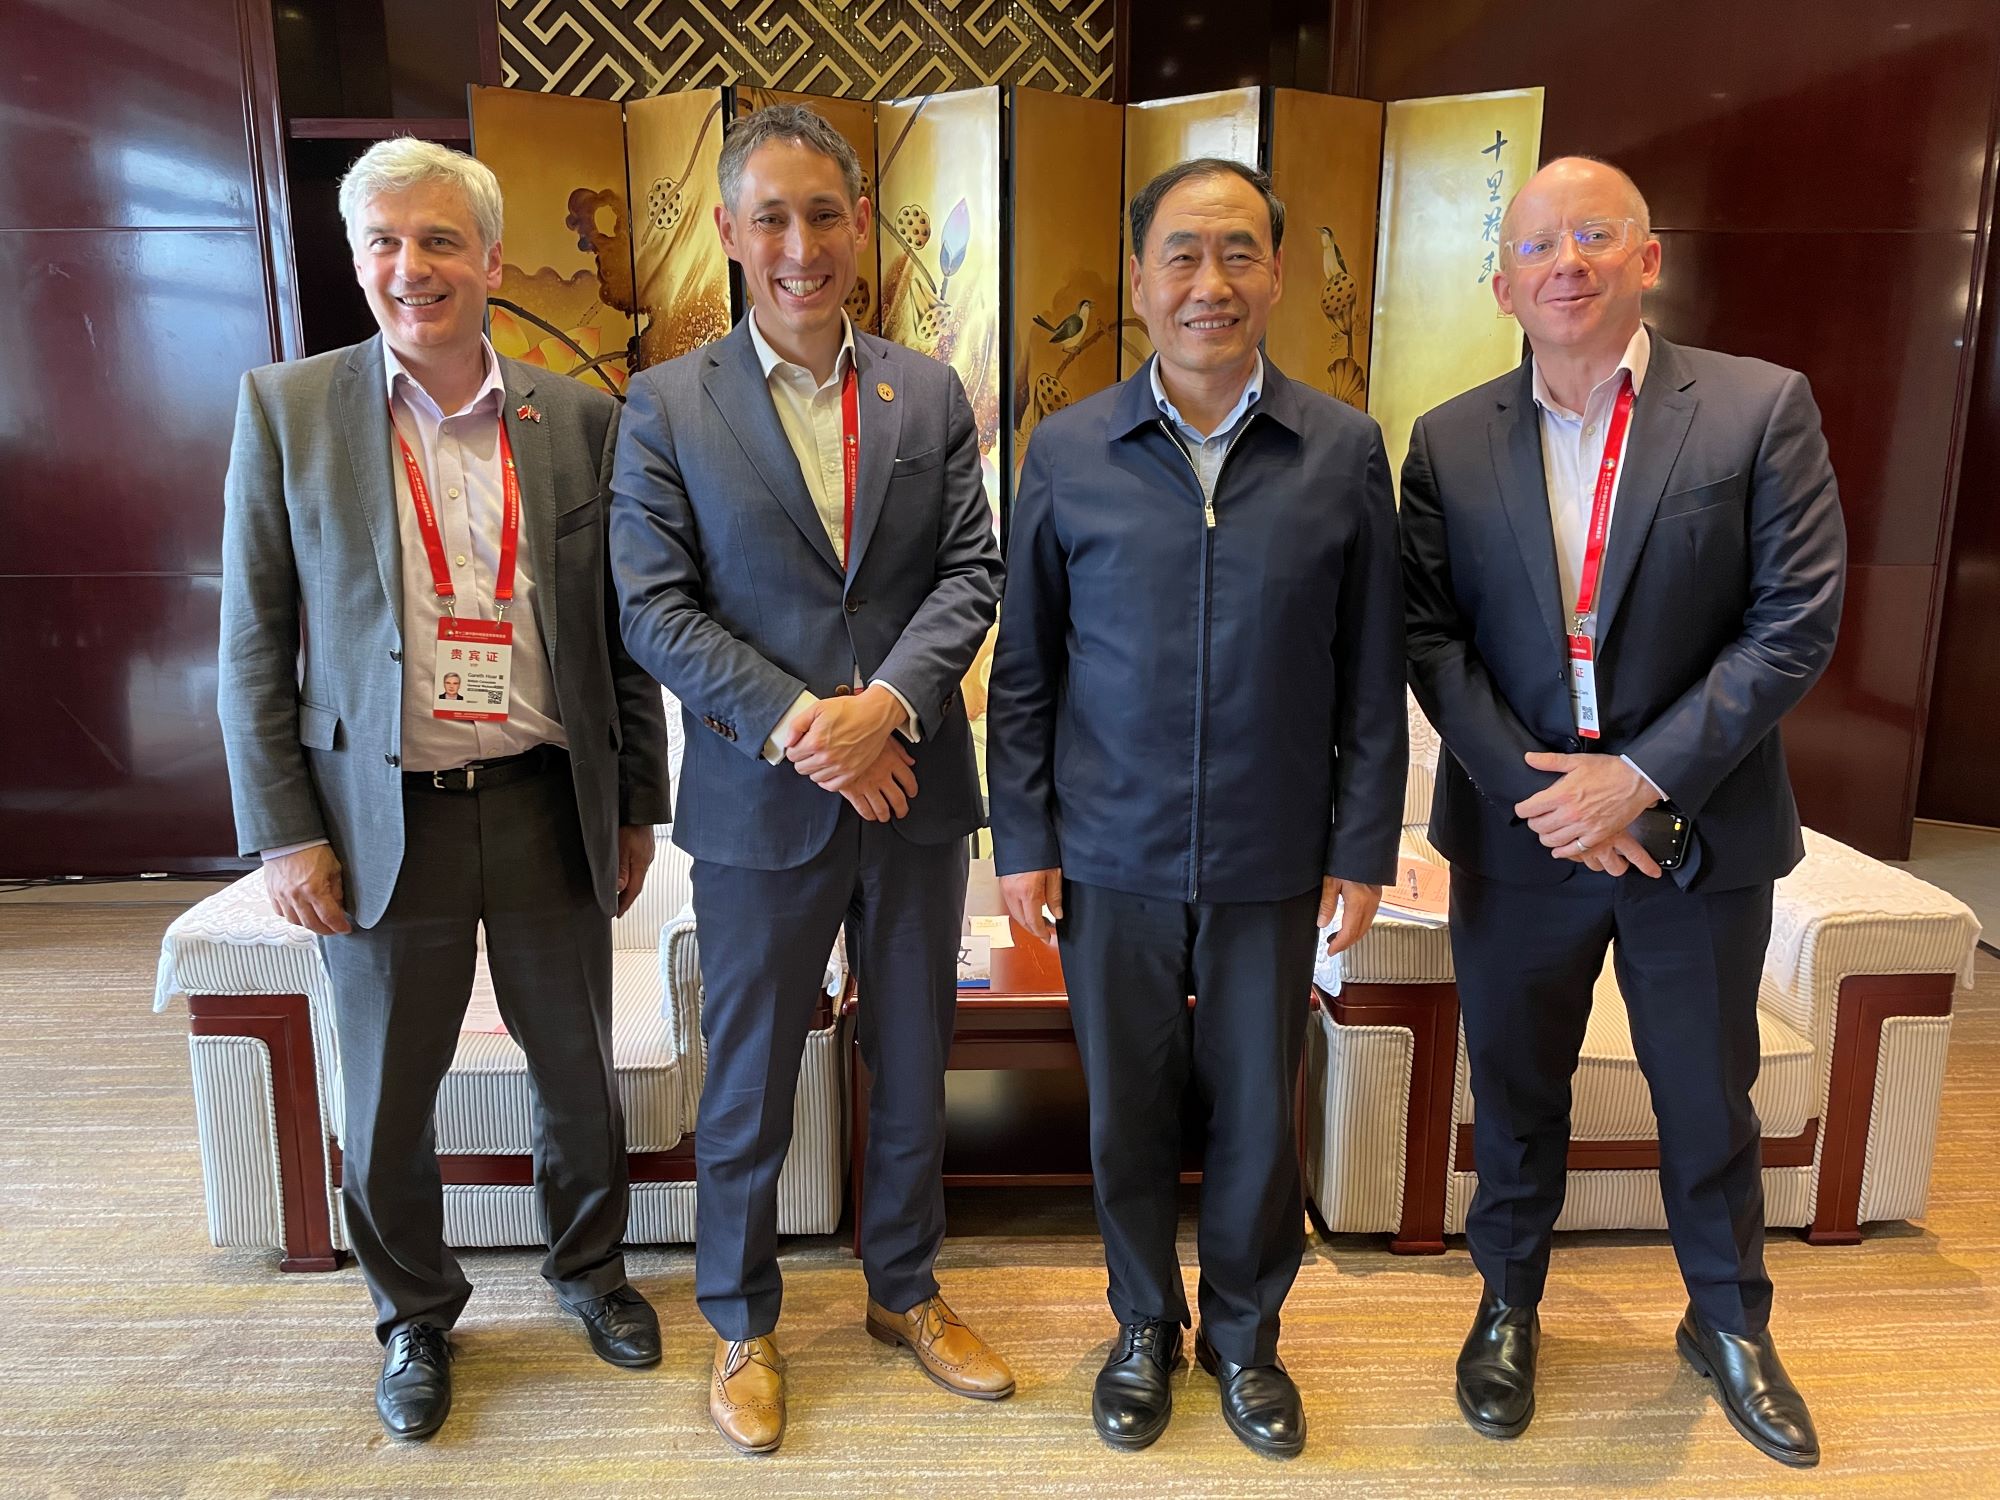 HM Trade Commissioner for China, John Edwards; CBBC's Vice-Chair Duncan Clark with Governor of Shanxi Province,LIN Wu, and Vice Governor of Shanxi Province, LU Dongliang